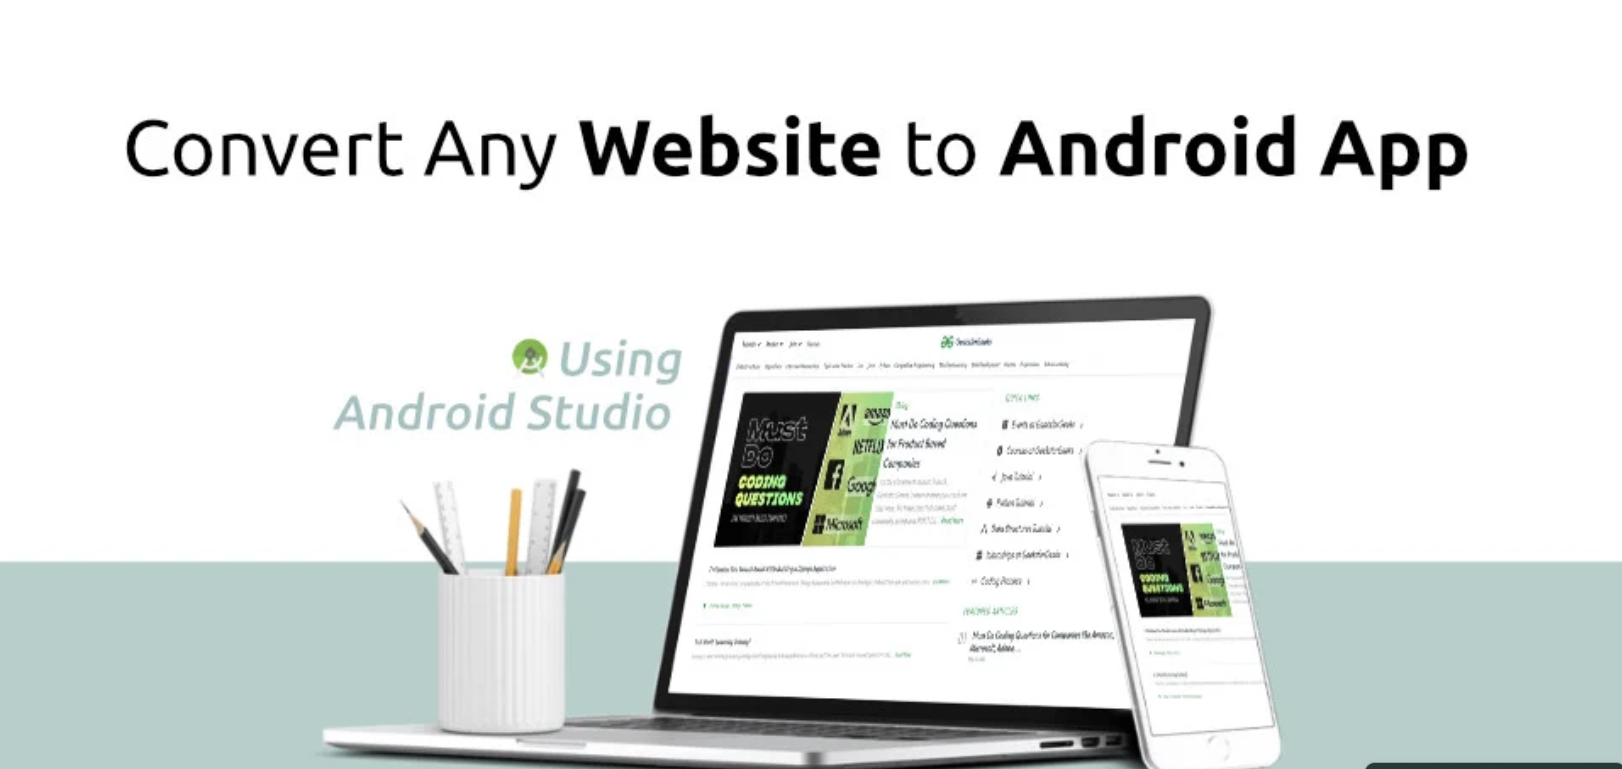 133543I will convert website to android app properly